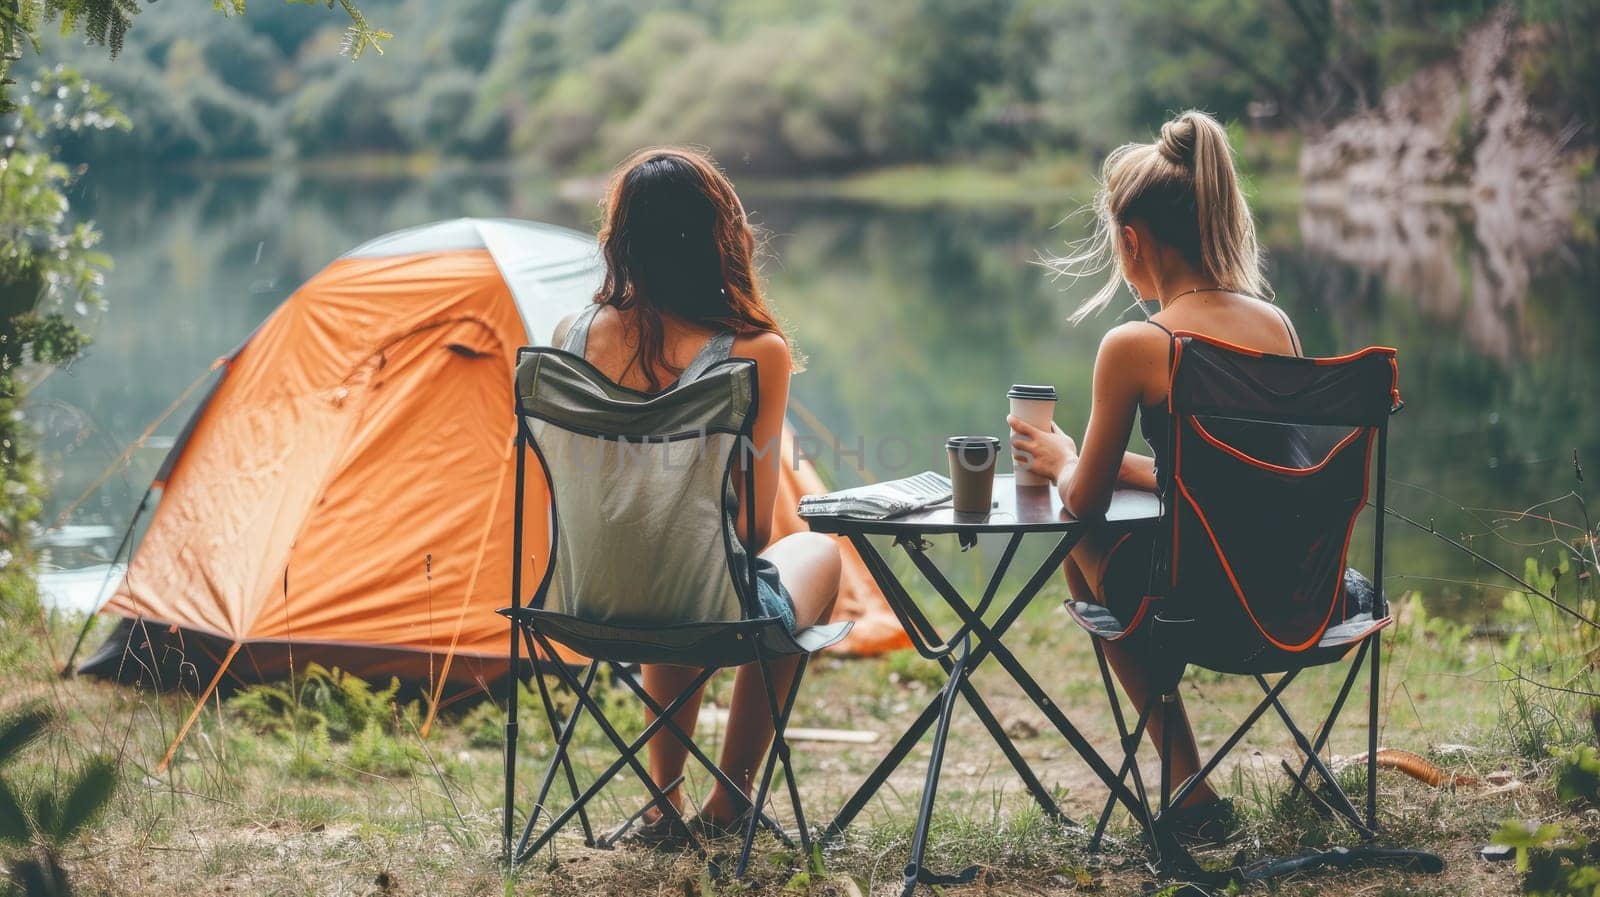 Two women sitting at a table by a lake, one of them holding a cup, Summer camping.